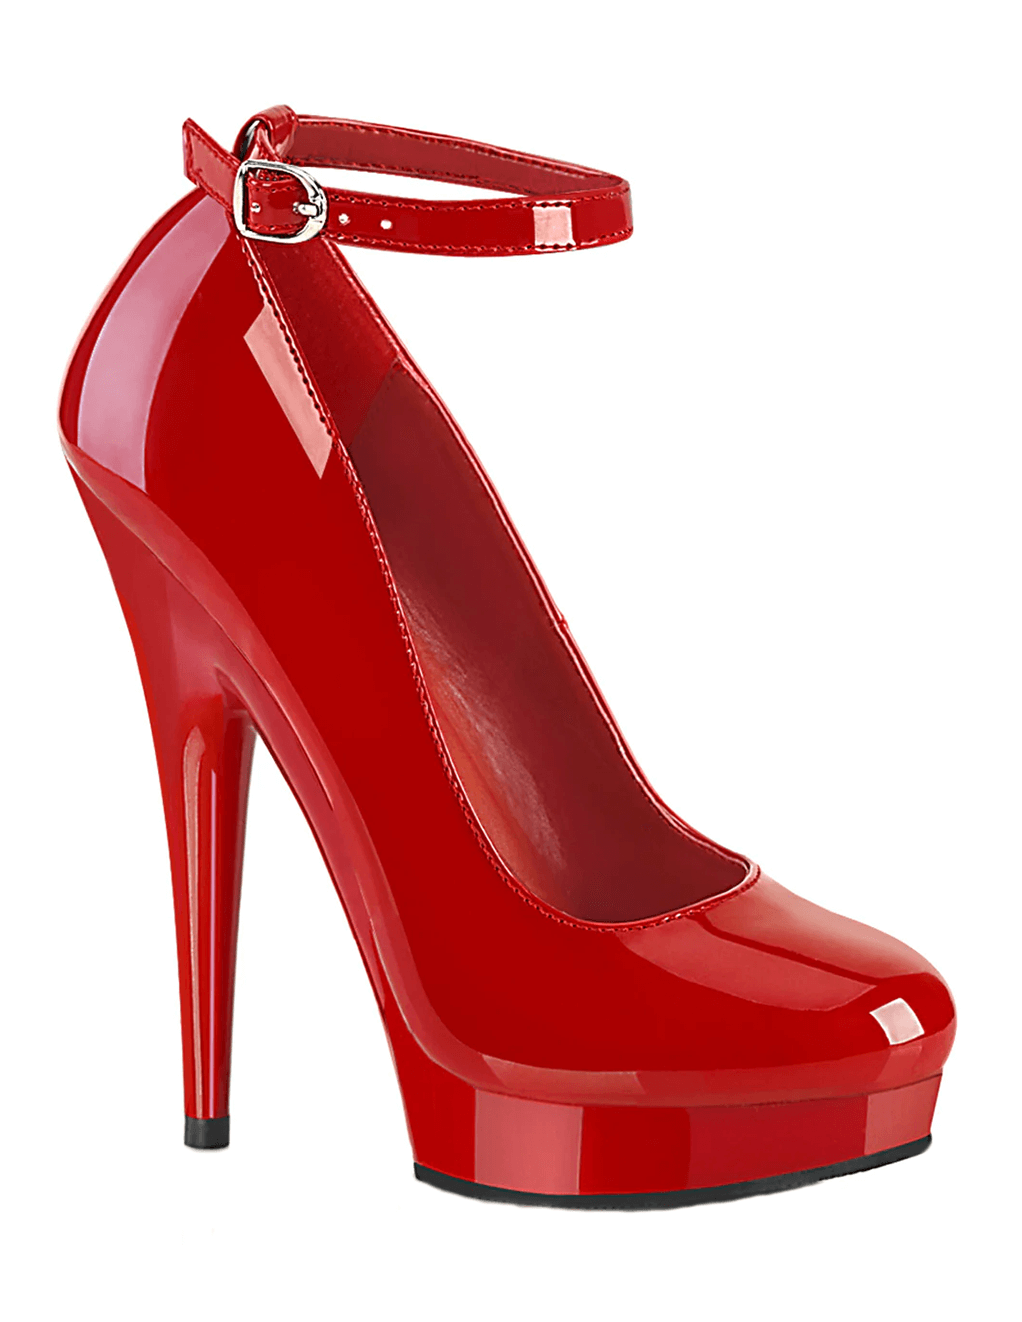 Sultry-686 Ankle Strap Platform Pump - Red Patent/Red - Main